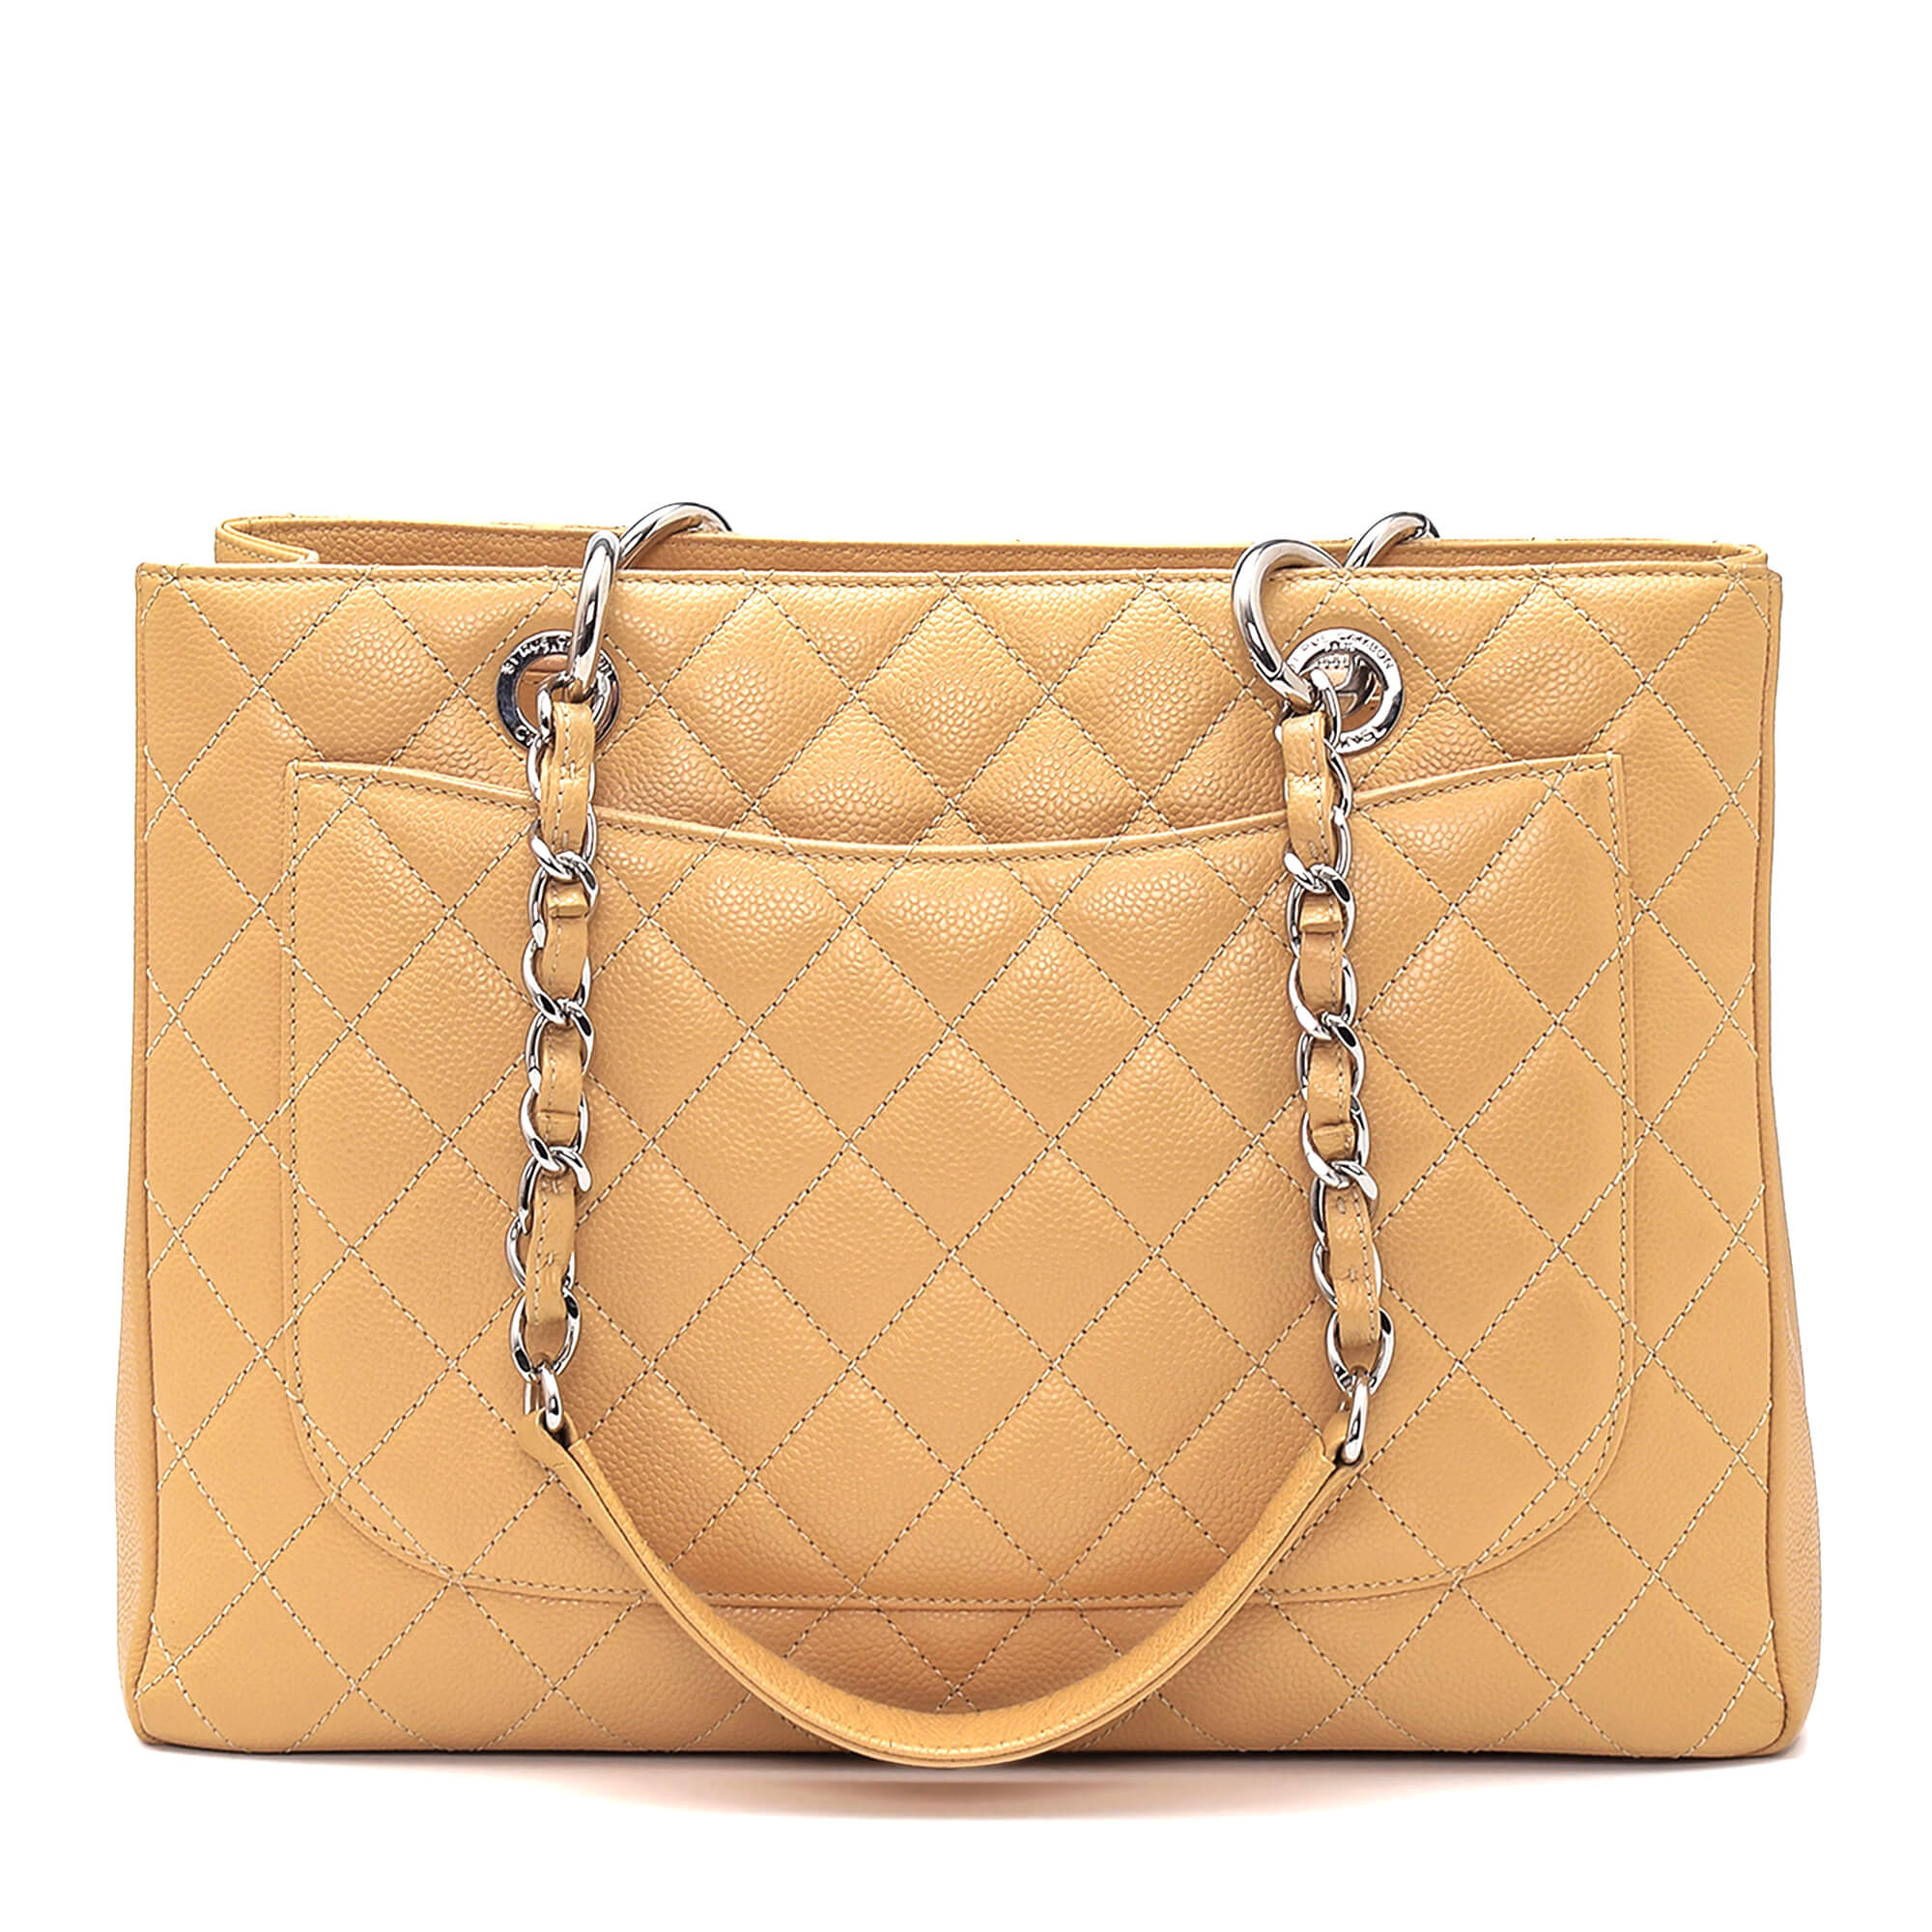 Chanel - Beige Caviar Leather Quilted Grande Shopping Tote Bag